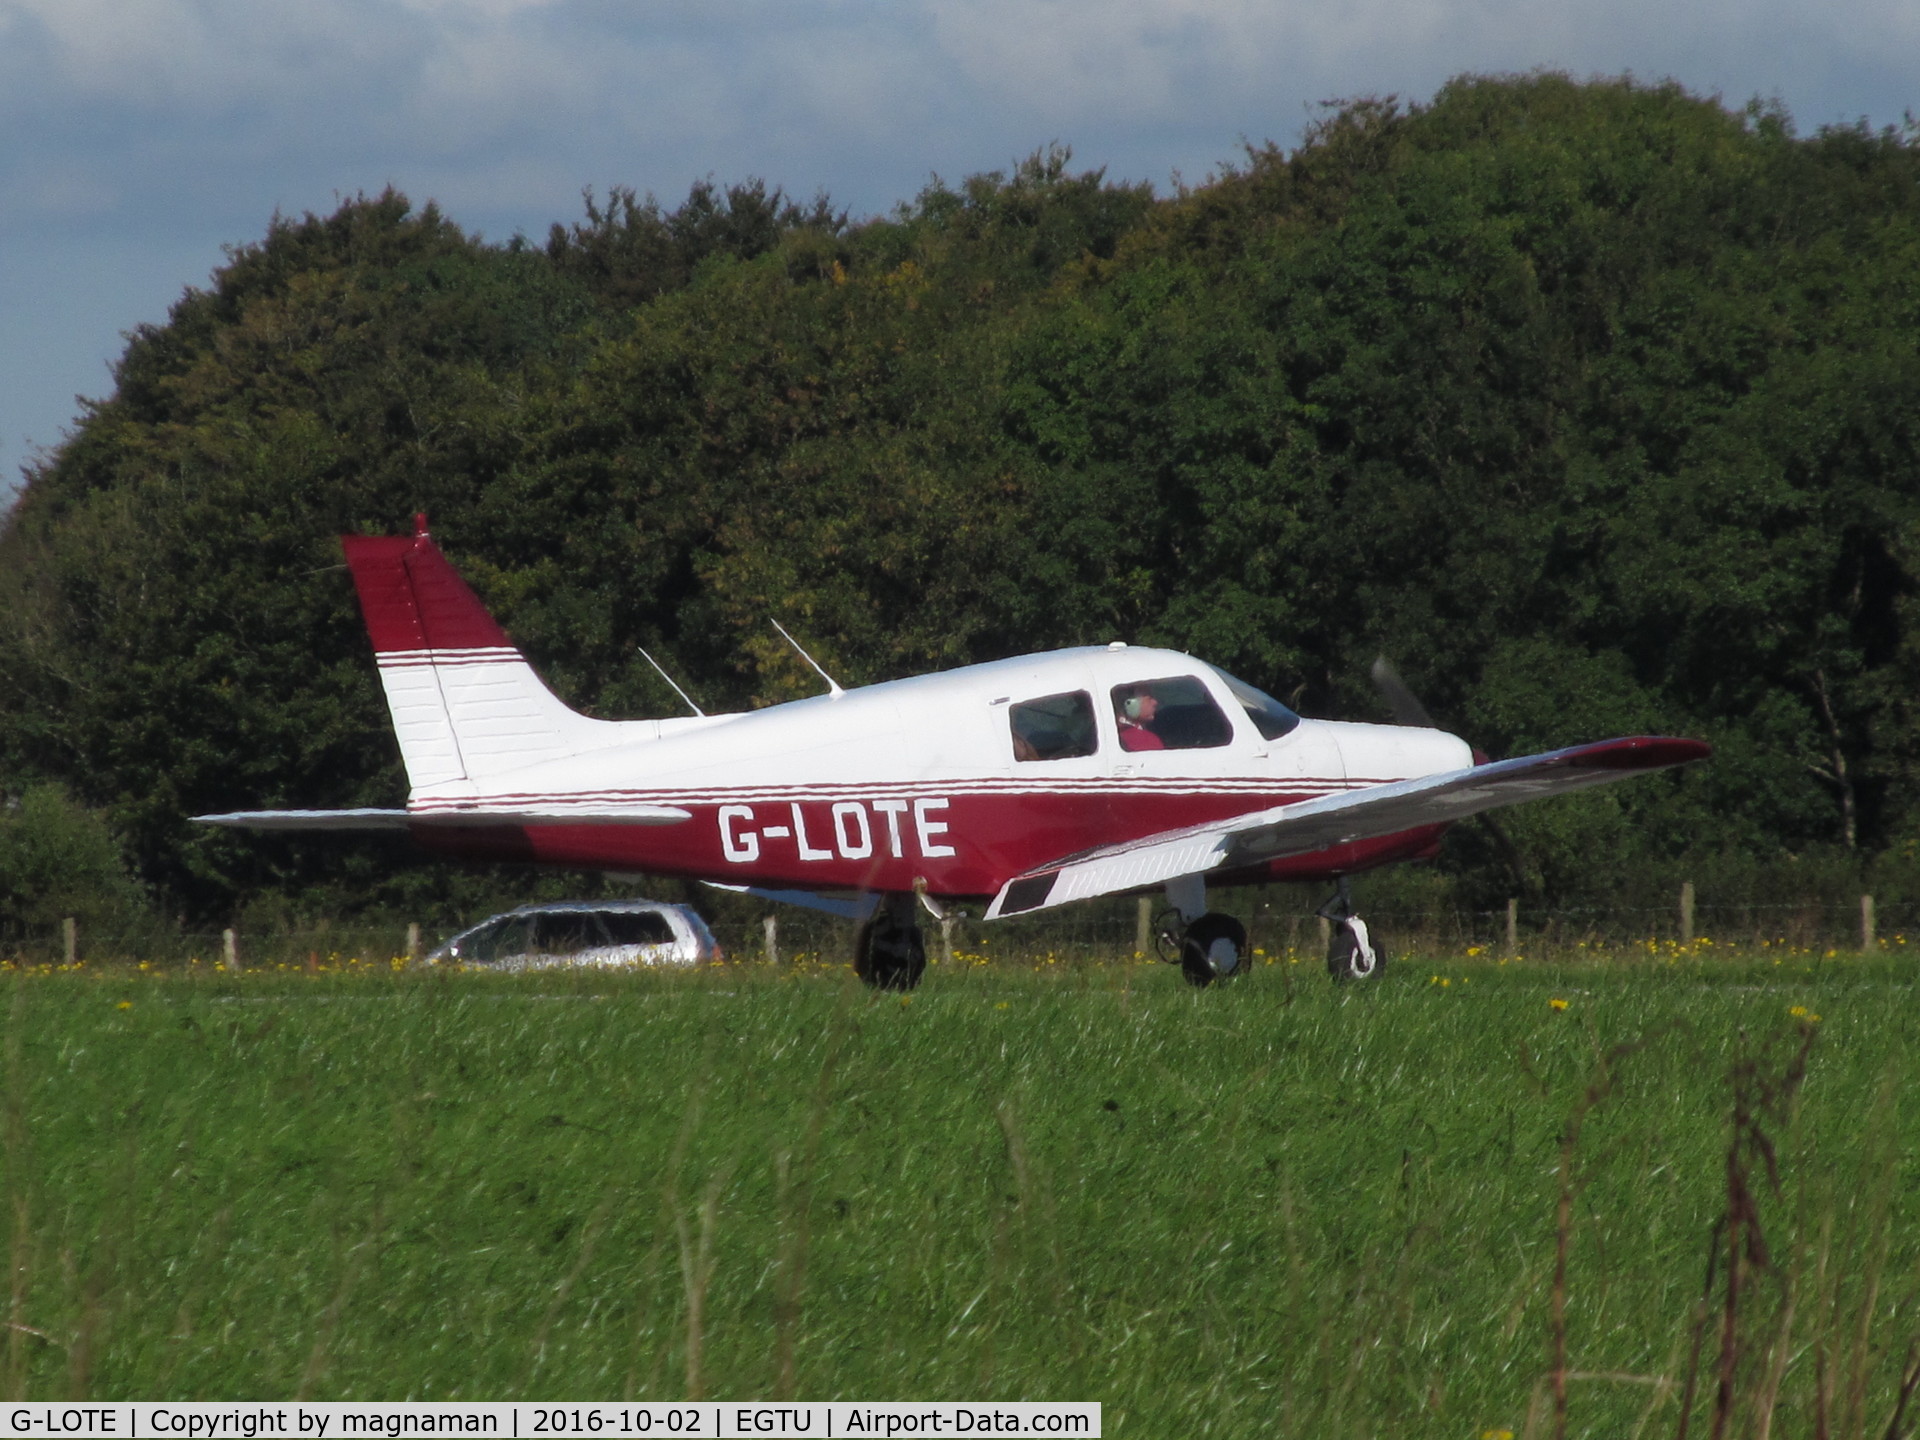 G-LOTE, 1989 Piper PA-28-161 Cadet C/N 2841089, taxy for departure